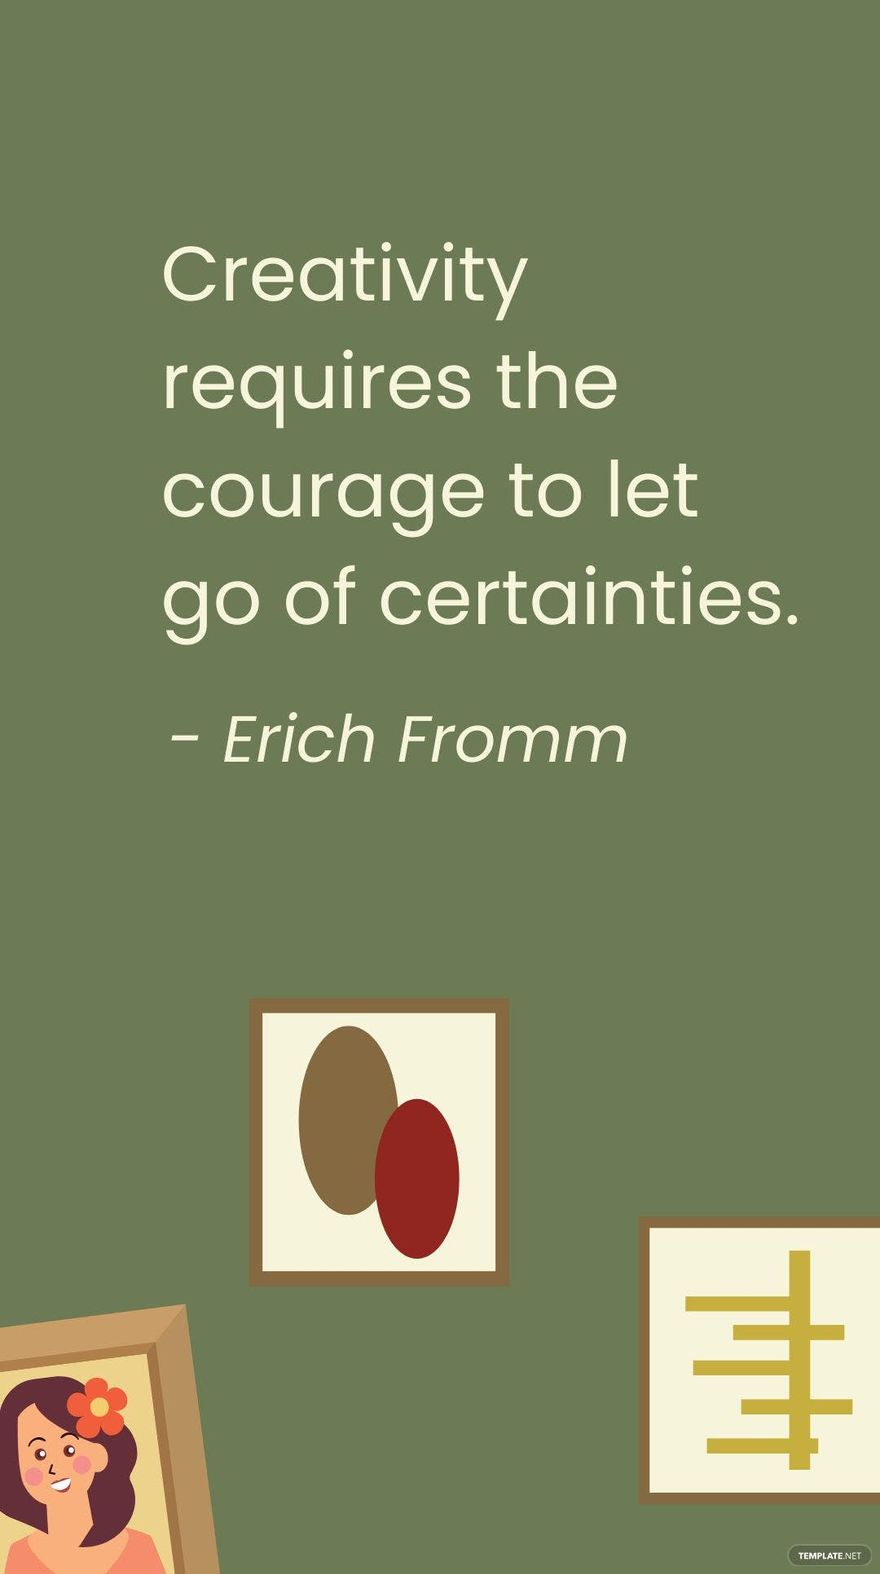 Erich Fromm - Creativity requires the courage to let go of certainties. in JPG